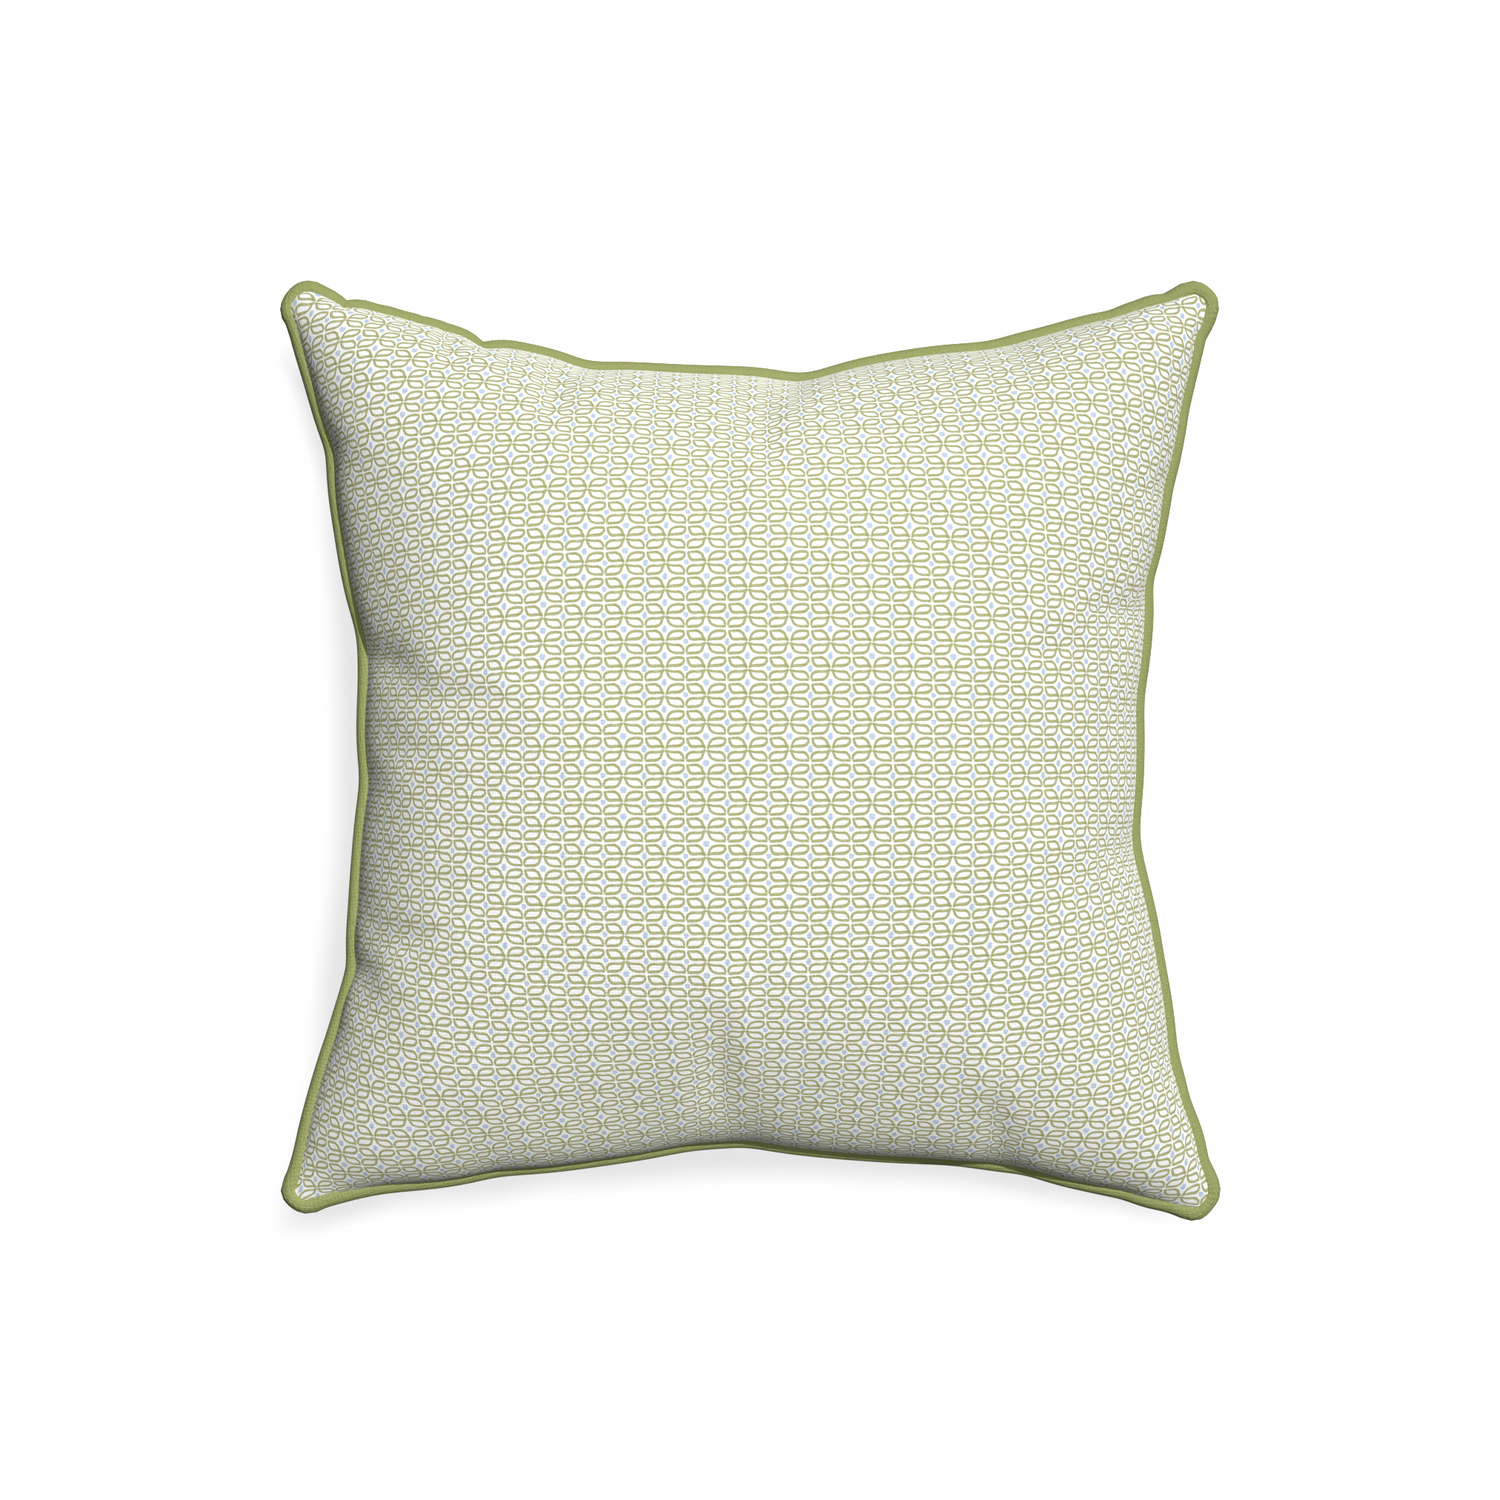 20-square loomi moss custom pillow with moss piping on white background